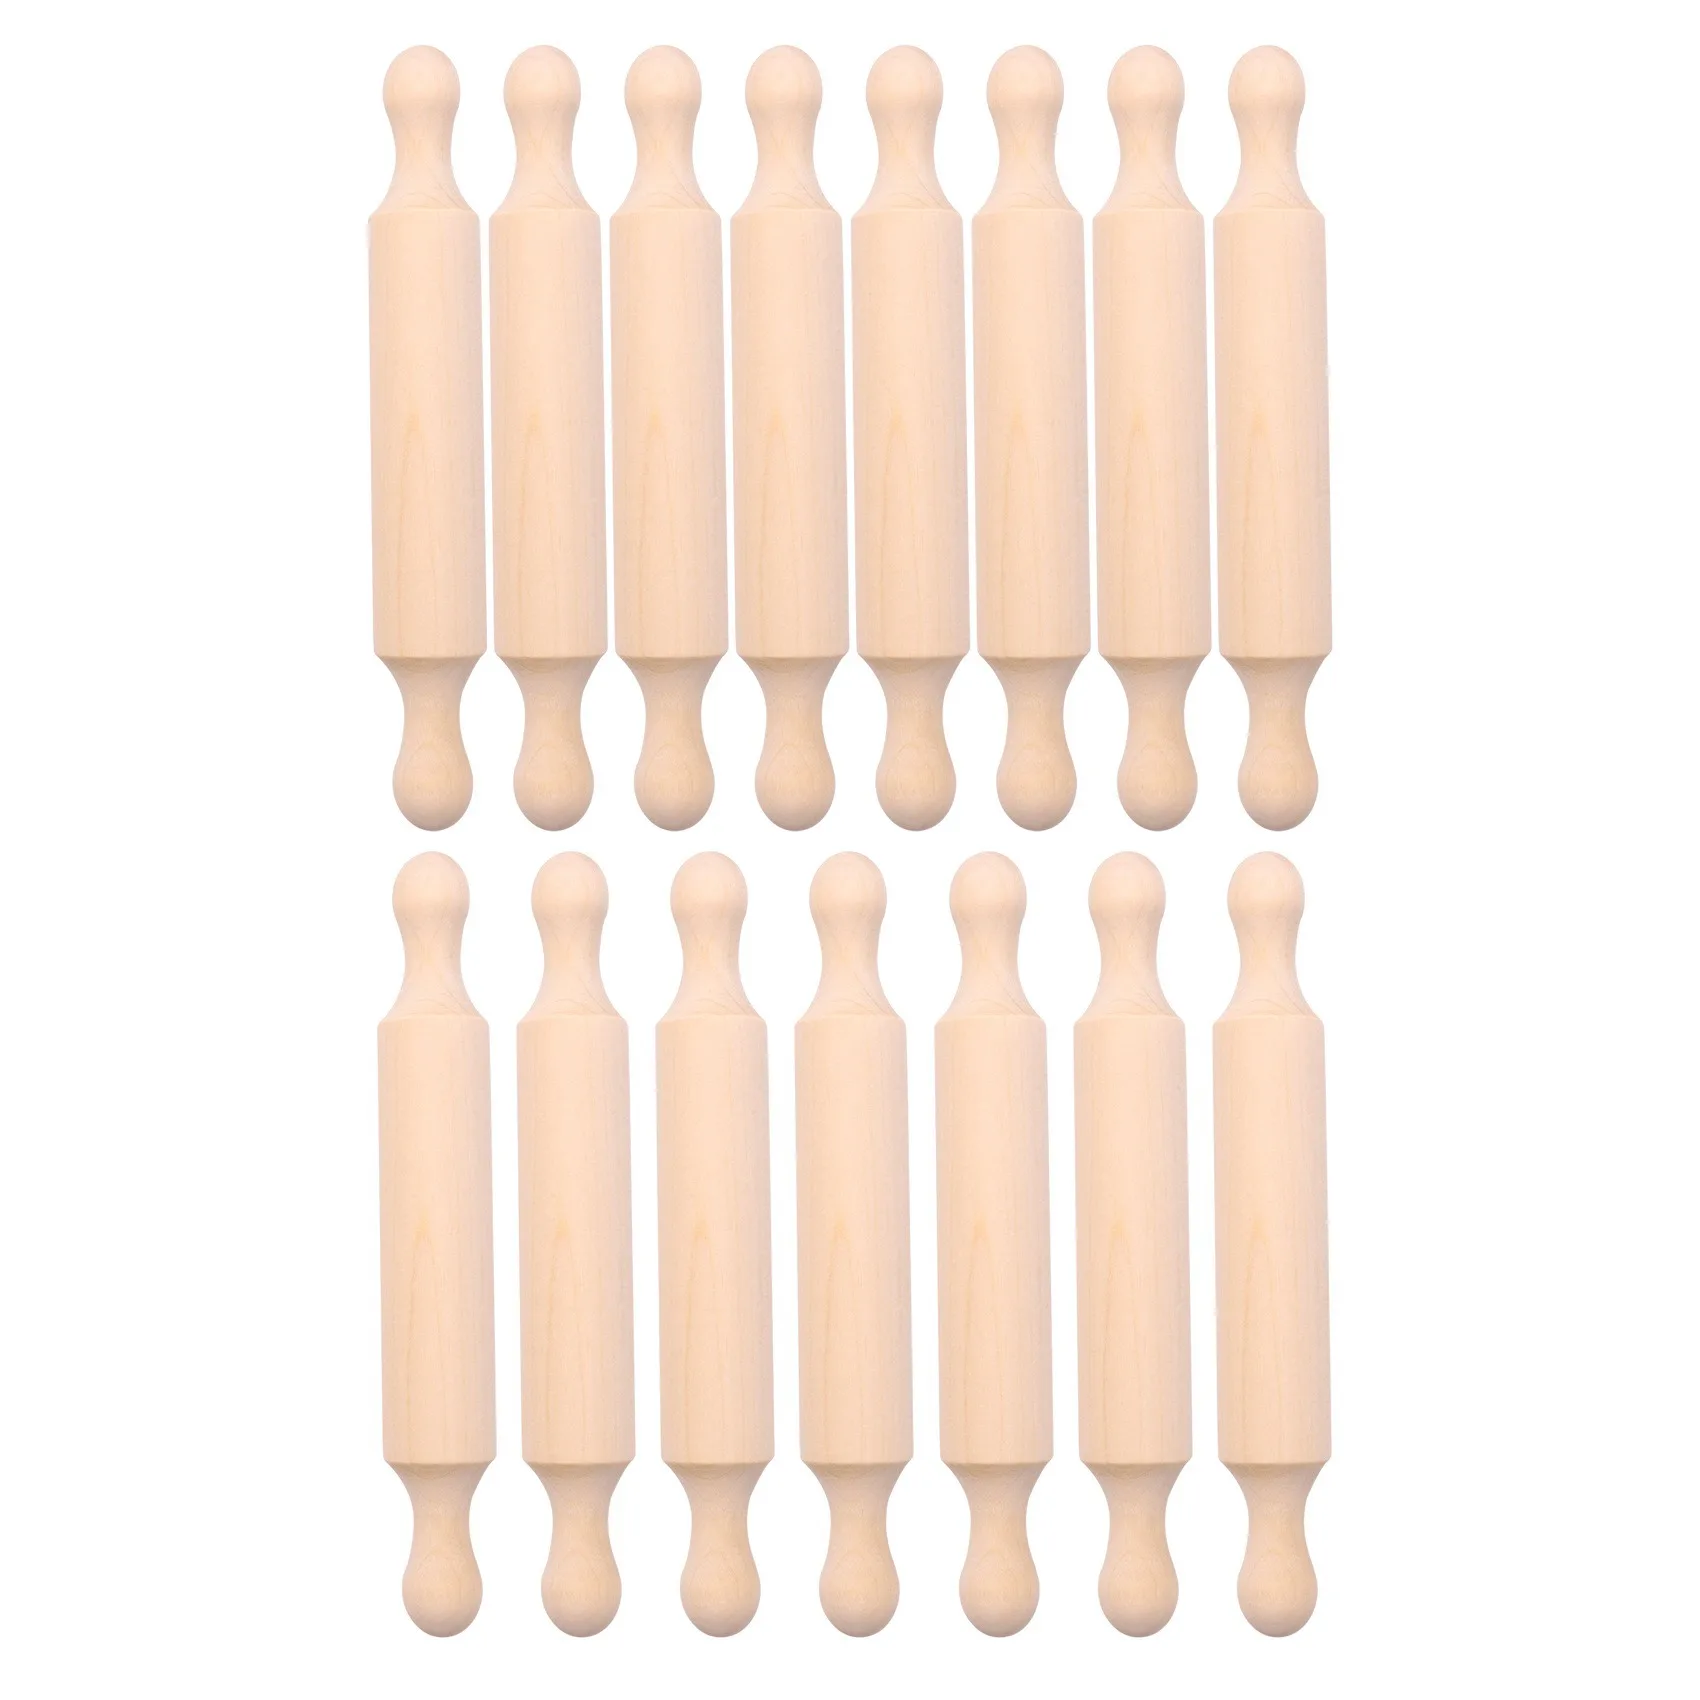 

15 Pieces Wooden Mini Rolling Pin 6 Inches Long Kitchen Baking Rolling Pin Small Wood Dough Roller for Children Fondant